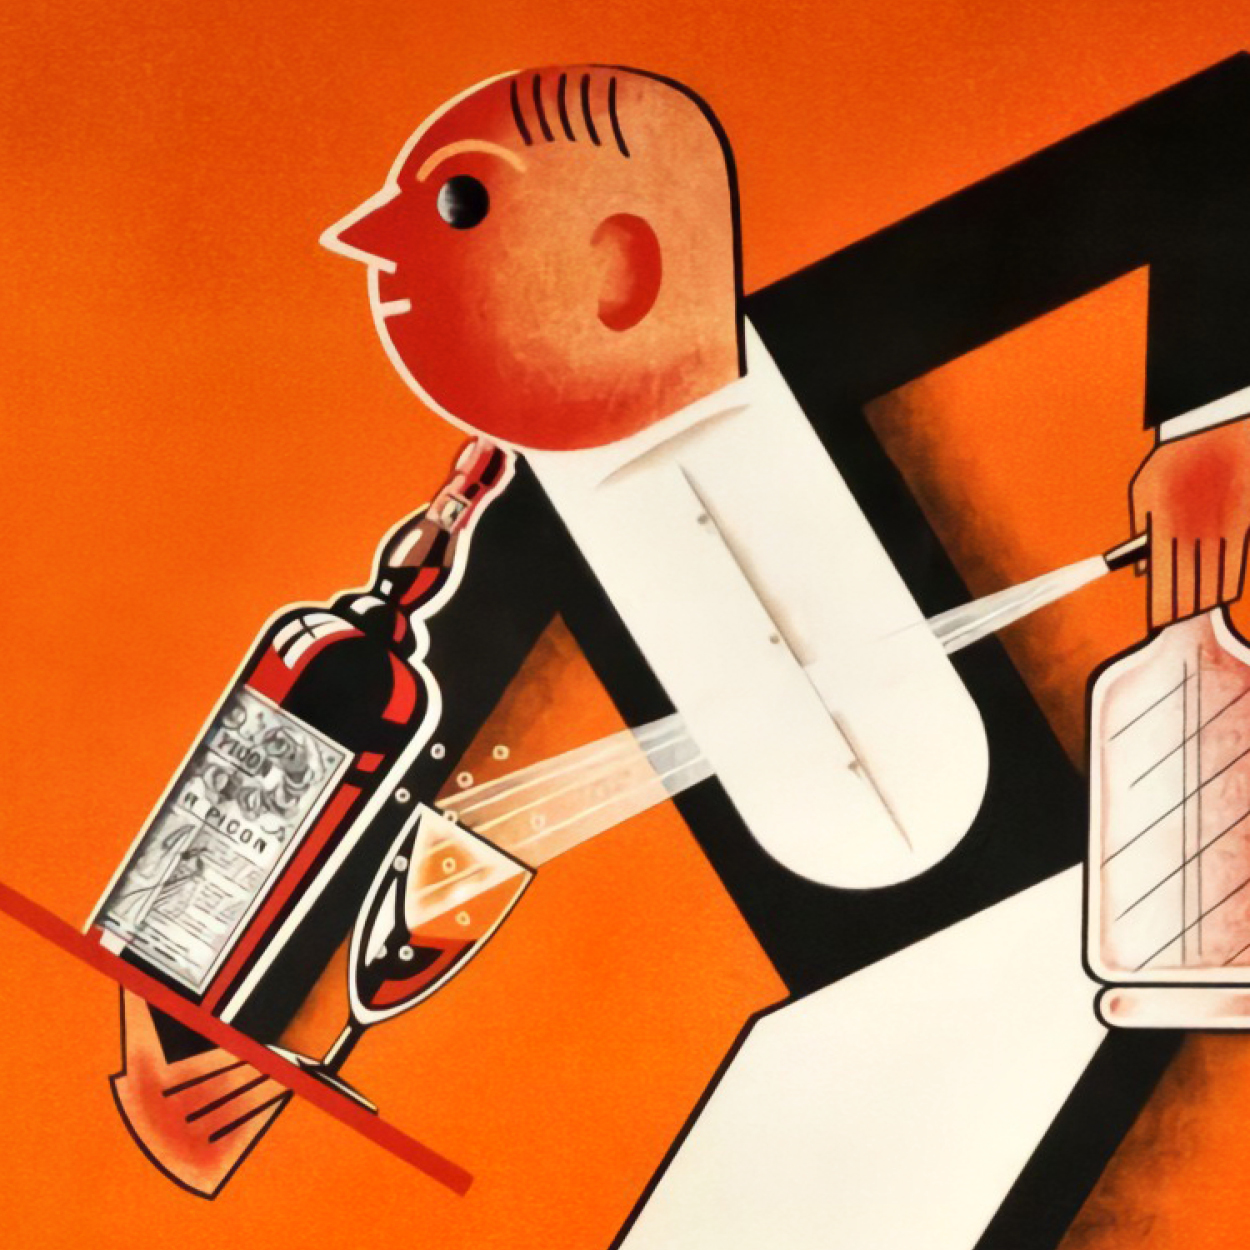 An Art Deco poster with a waiter figurine spraying soda water into a cocktail glass while a holding a tray with a bottle of Picon.